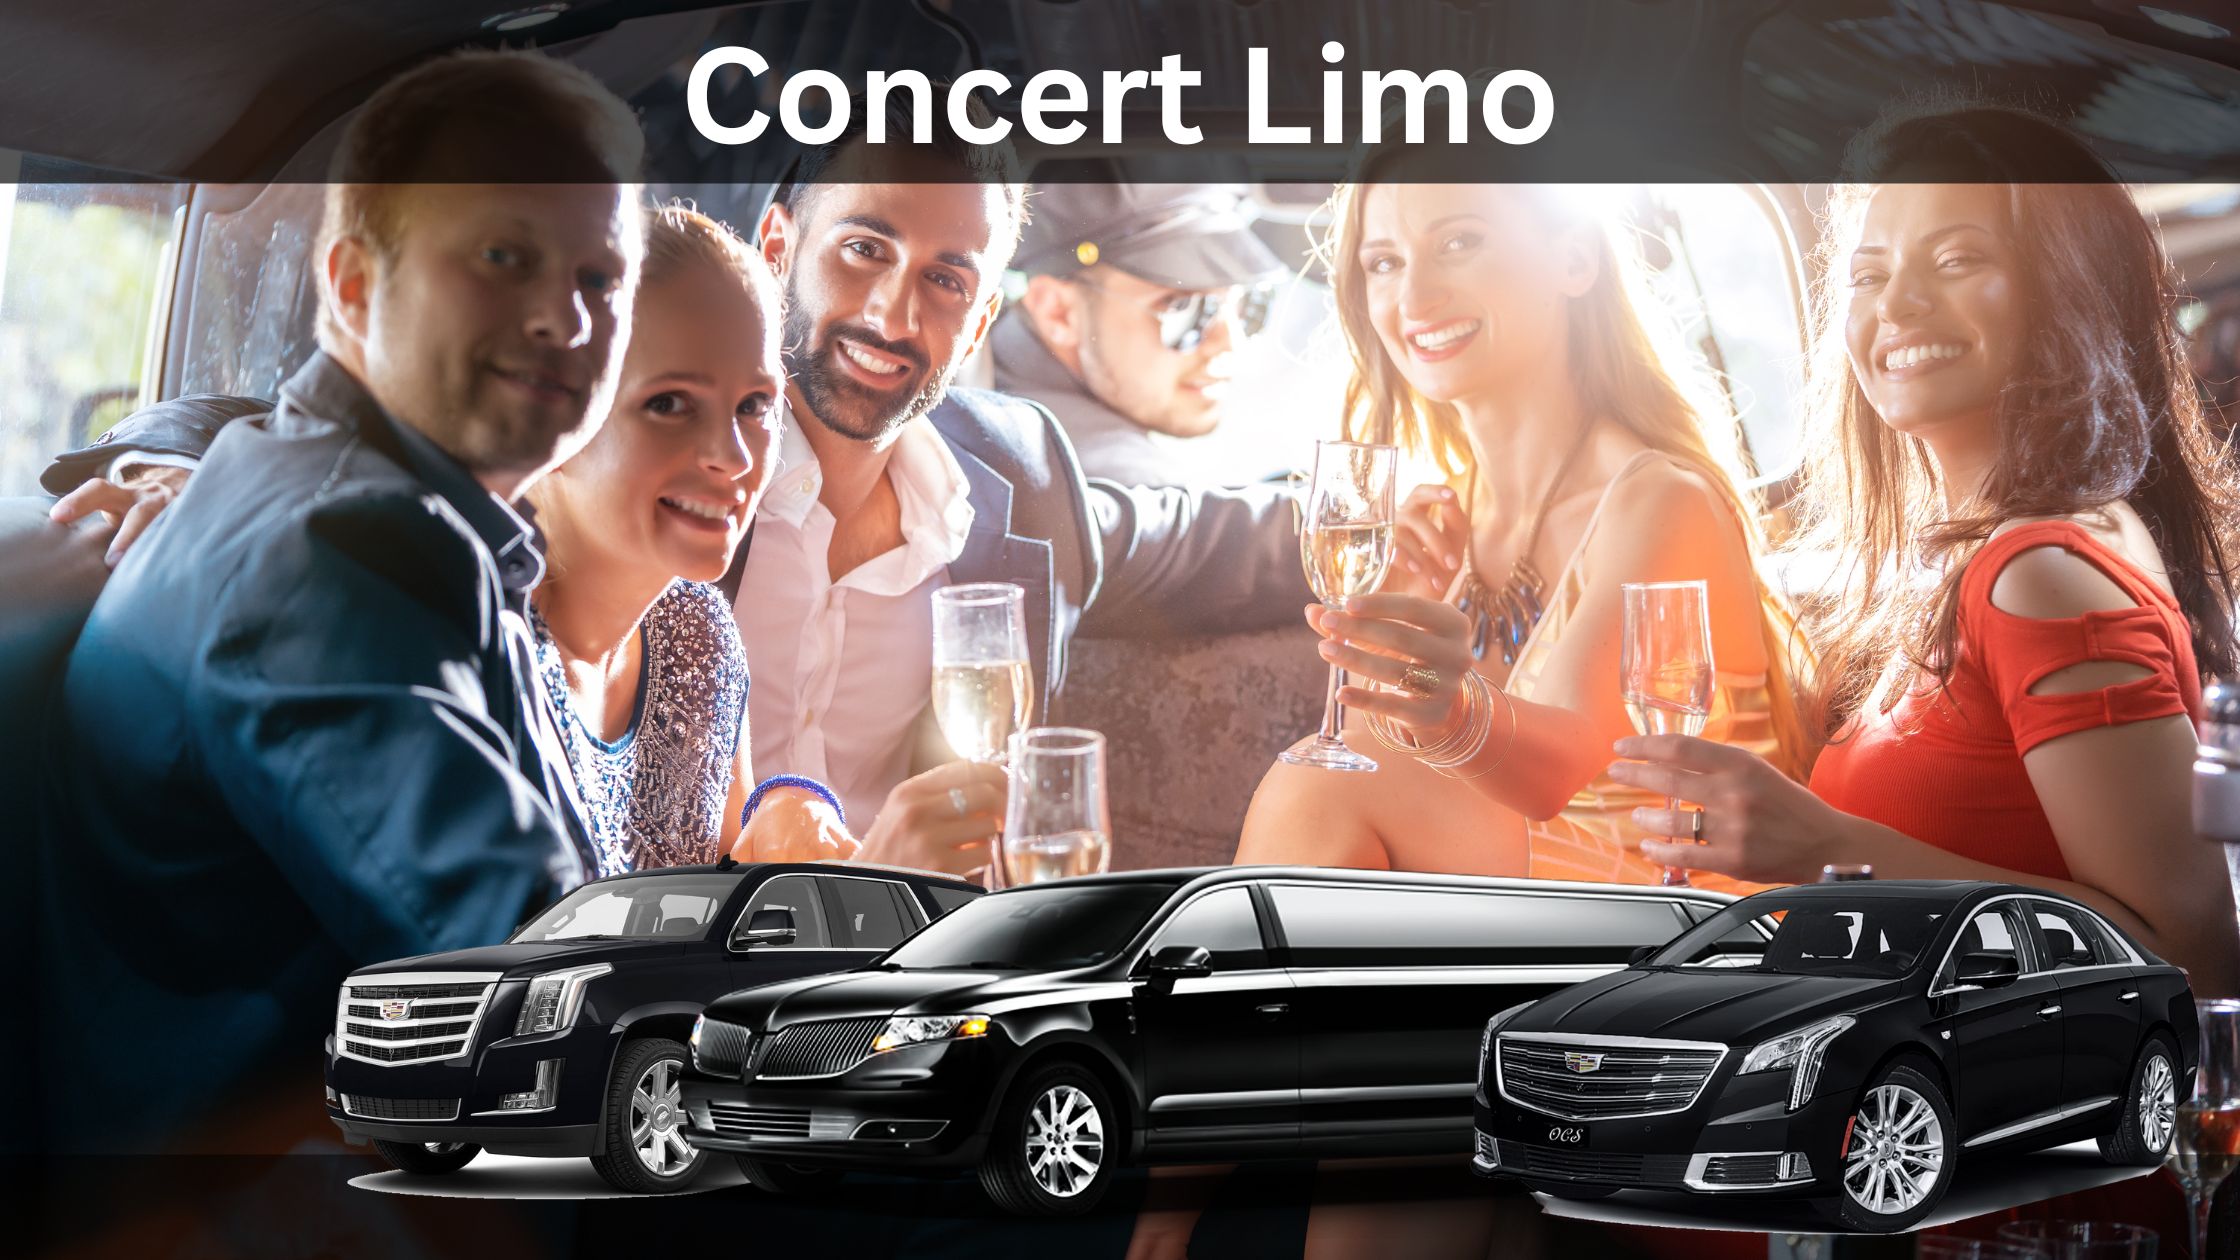 Concert Limo Service